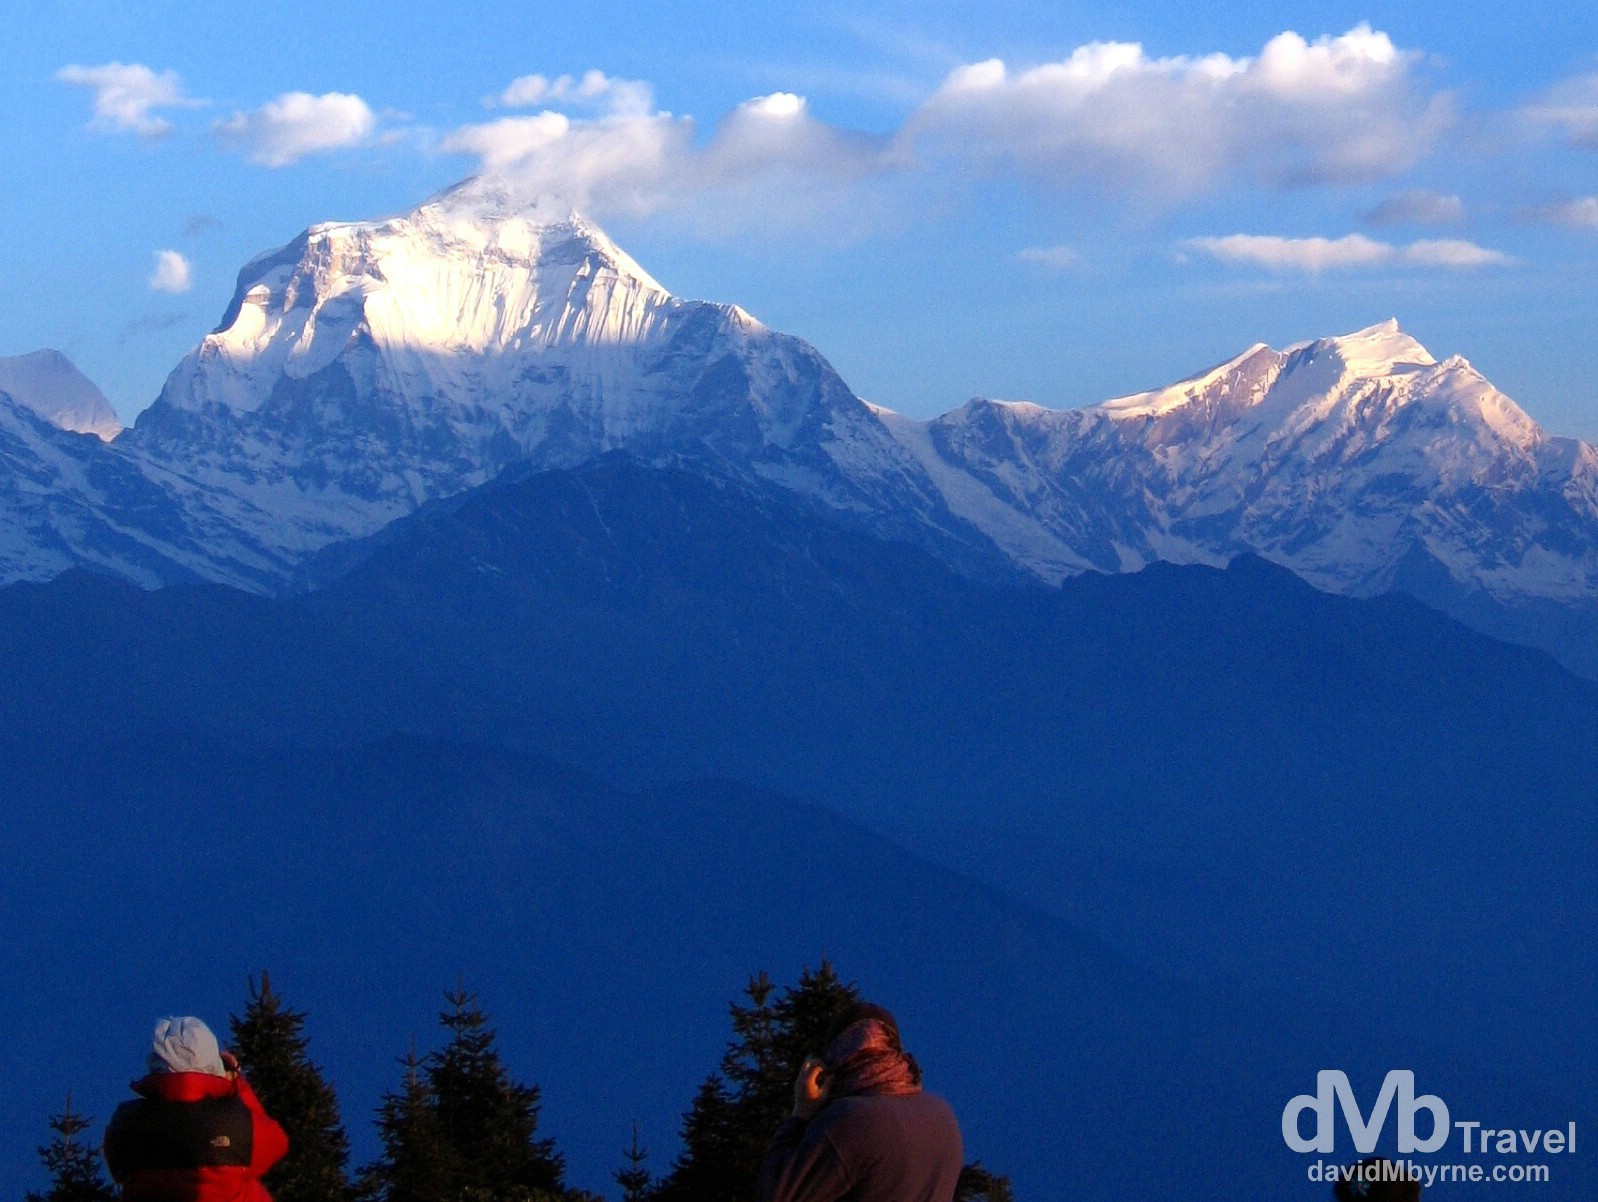 Early sunrise creeps up the face of Dhaulagiri (8,167 metres / 27,000 ft) as seen from Poon Hill, Annapurna Conservation Area, western Nepal. March 12th, 2008.